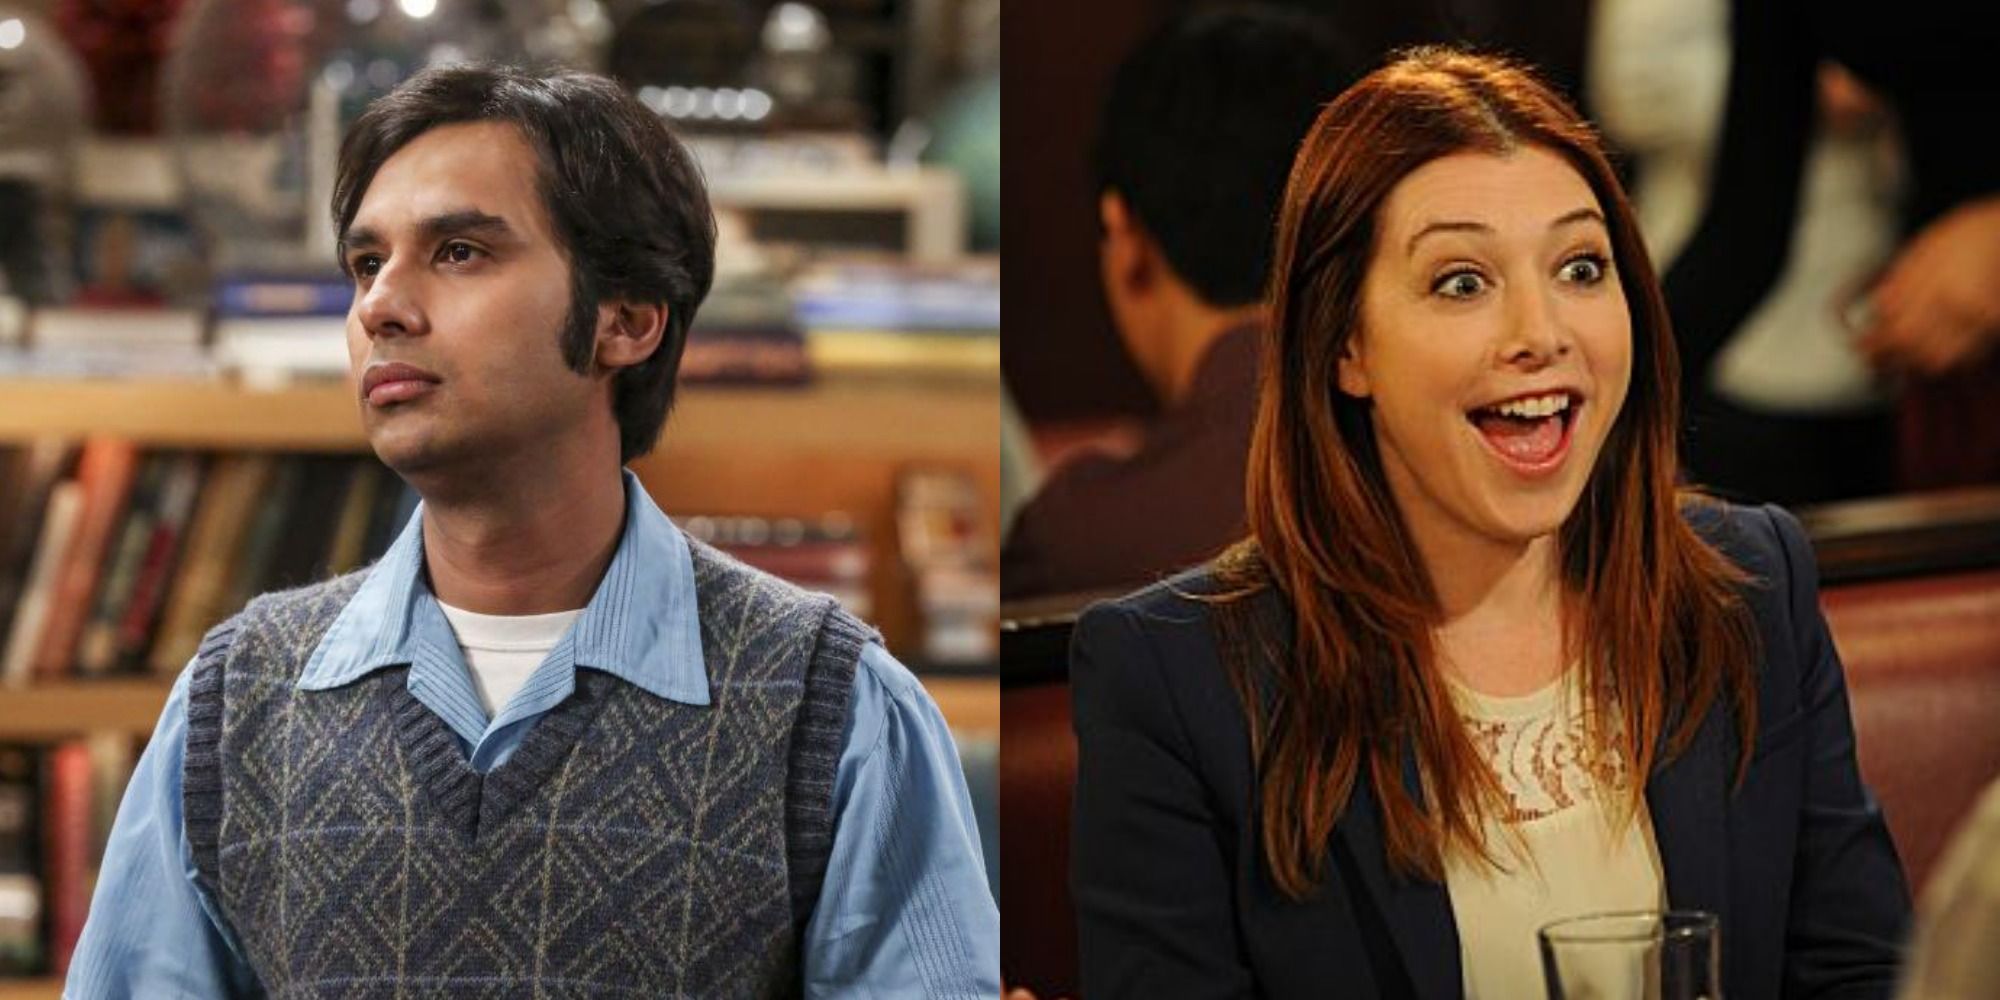 A split-screen image showing The Big Bang Theory's Raj Koothrappali and How I Met Your Mother's Lily Aldrin